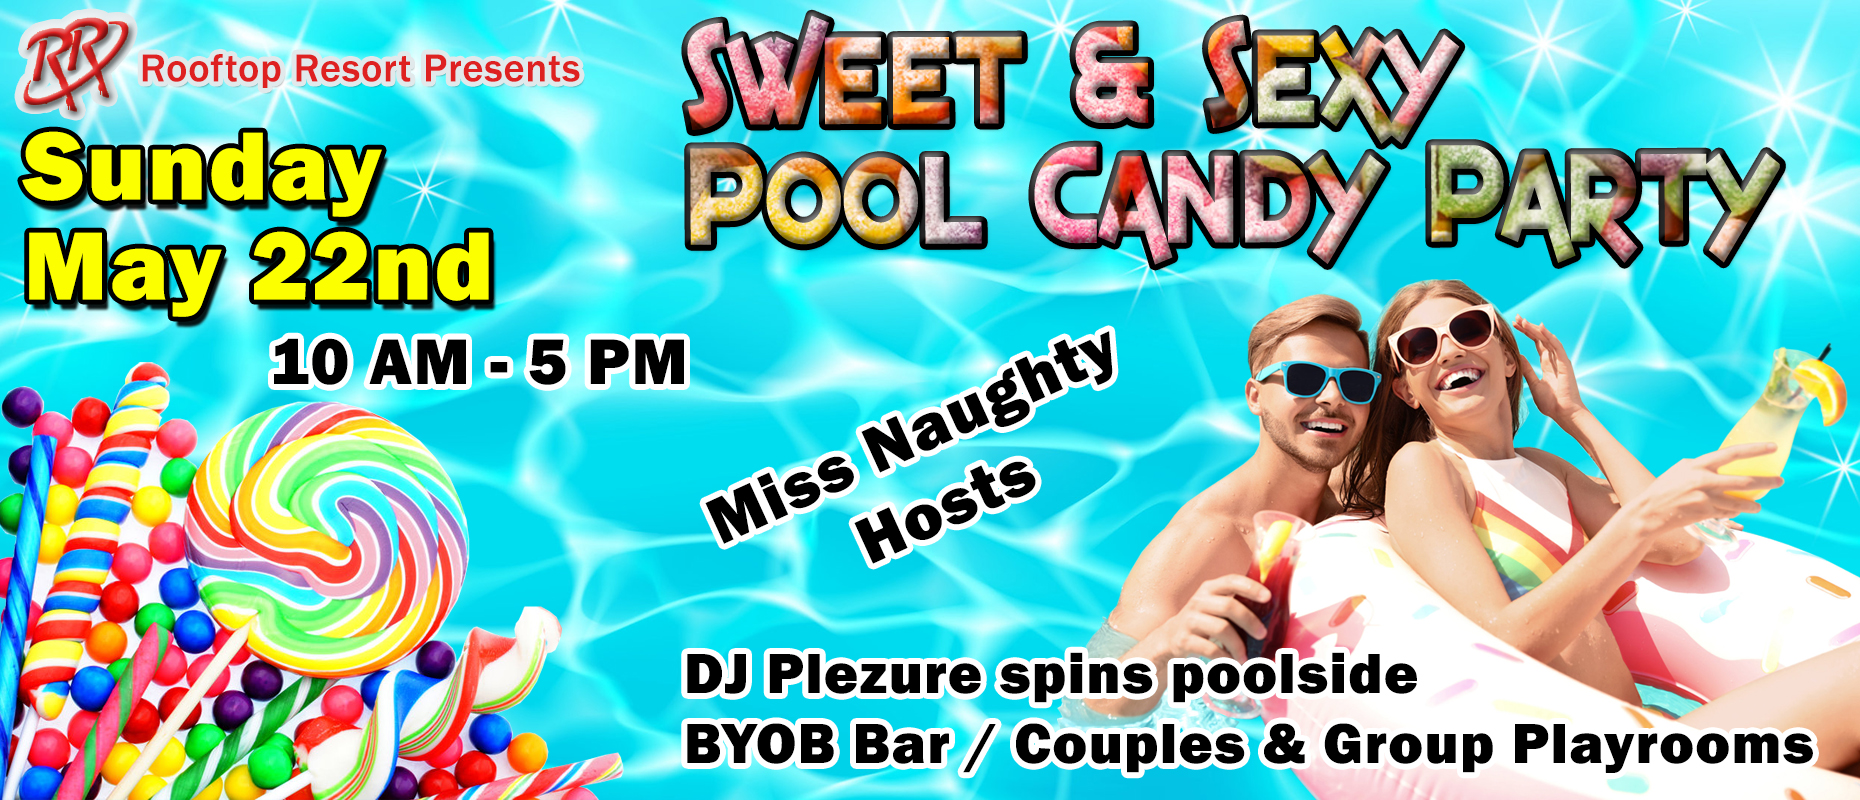 Pool Candy Party